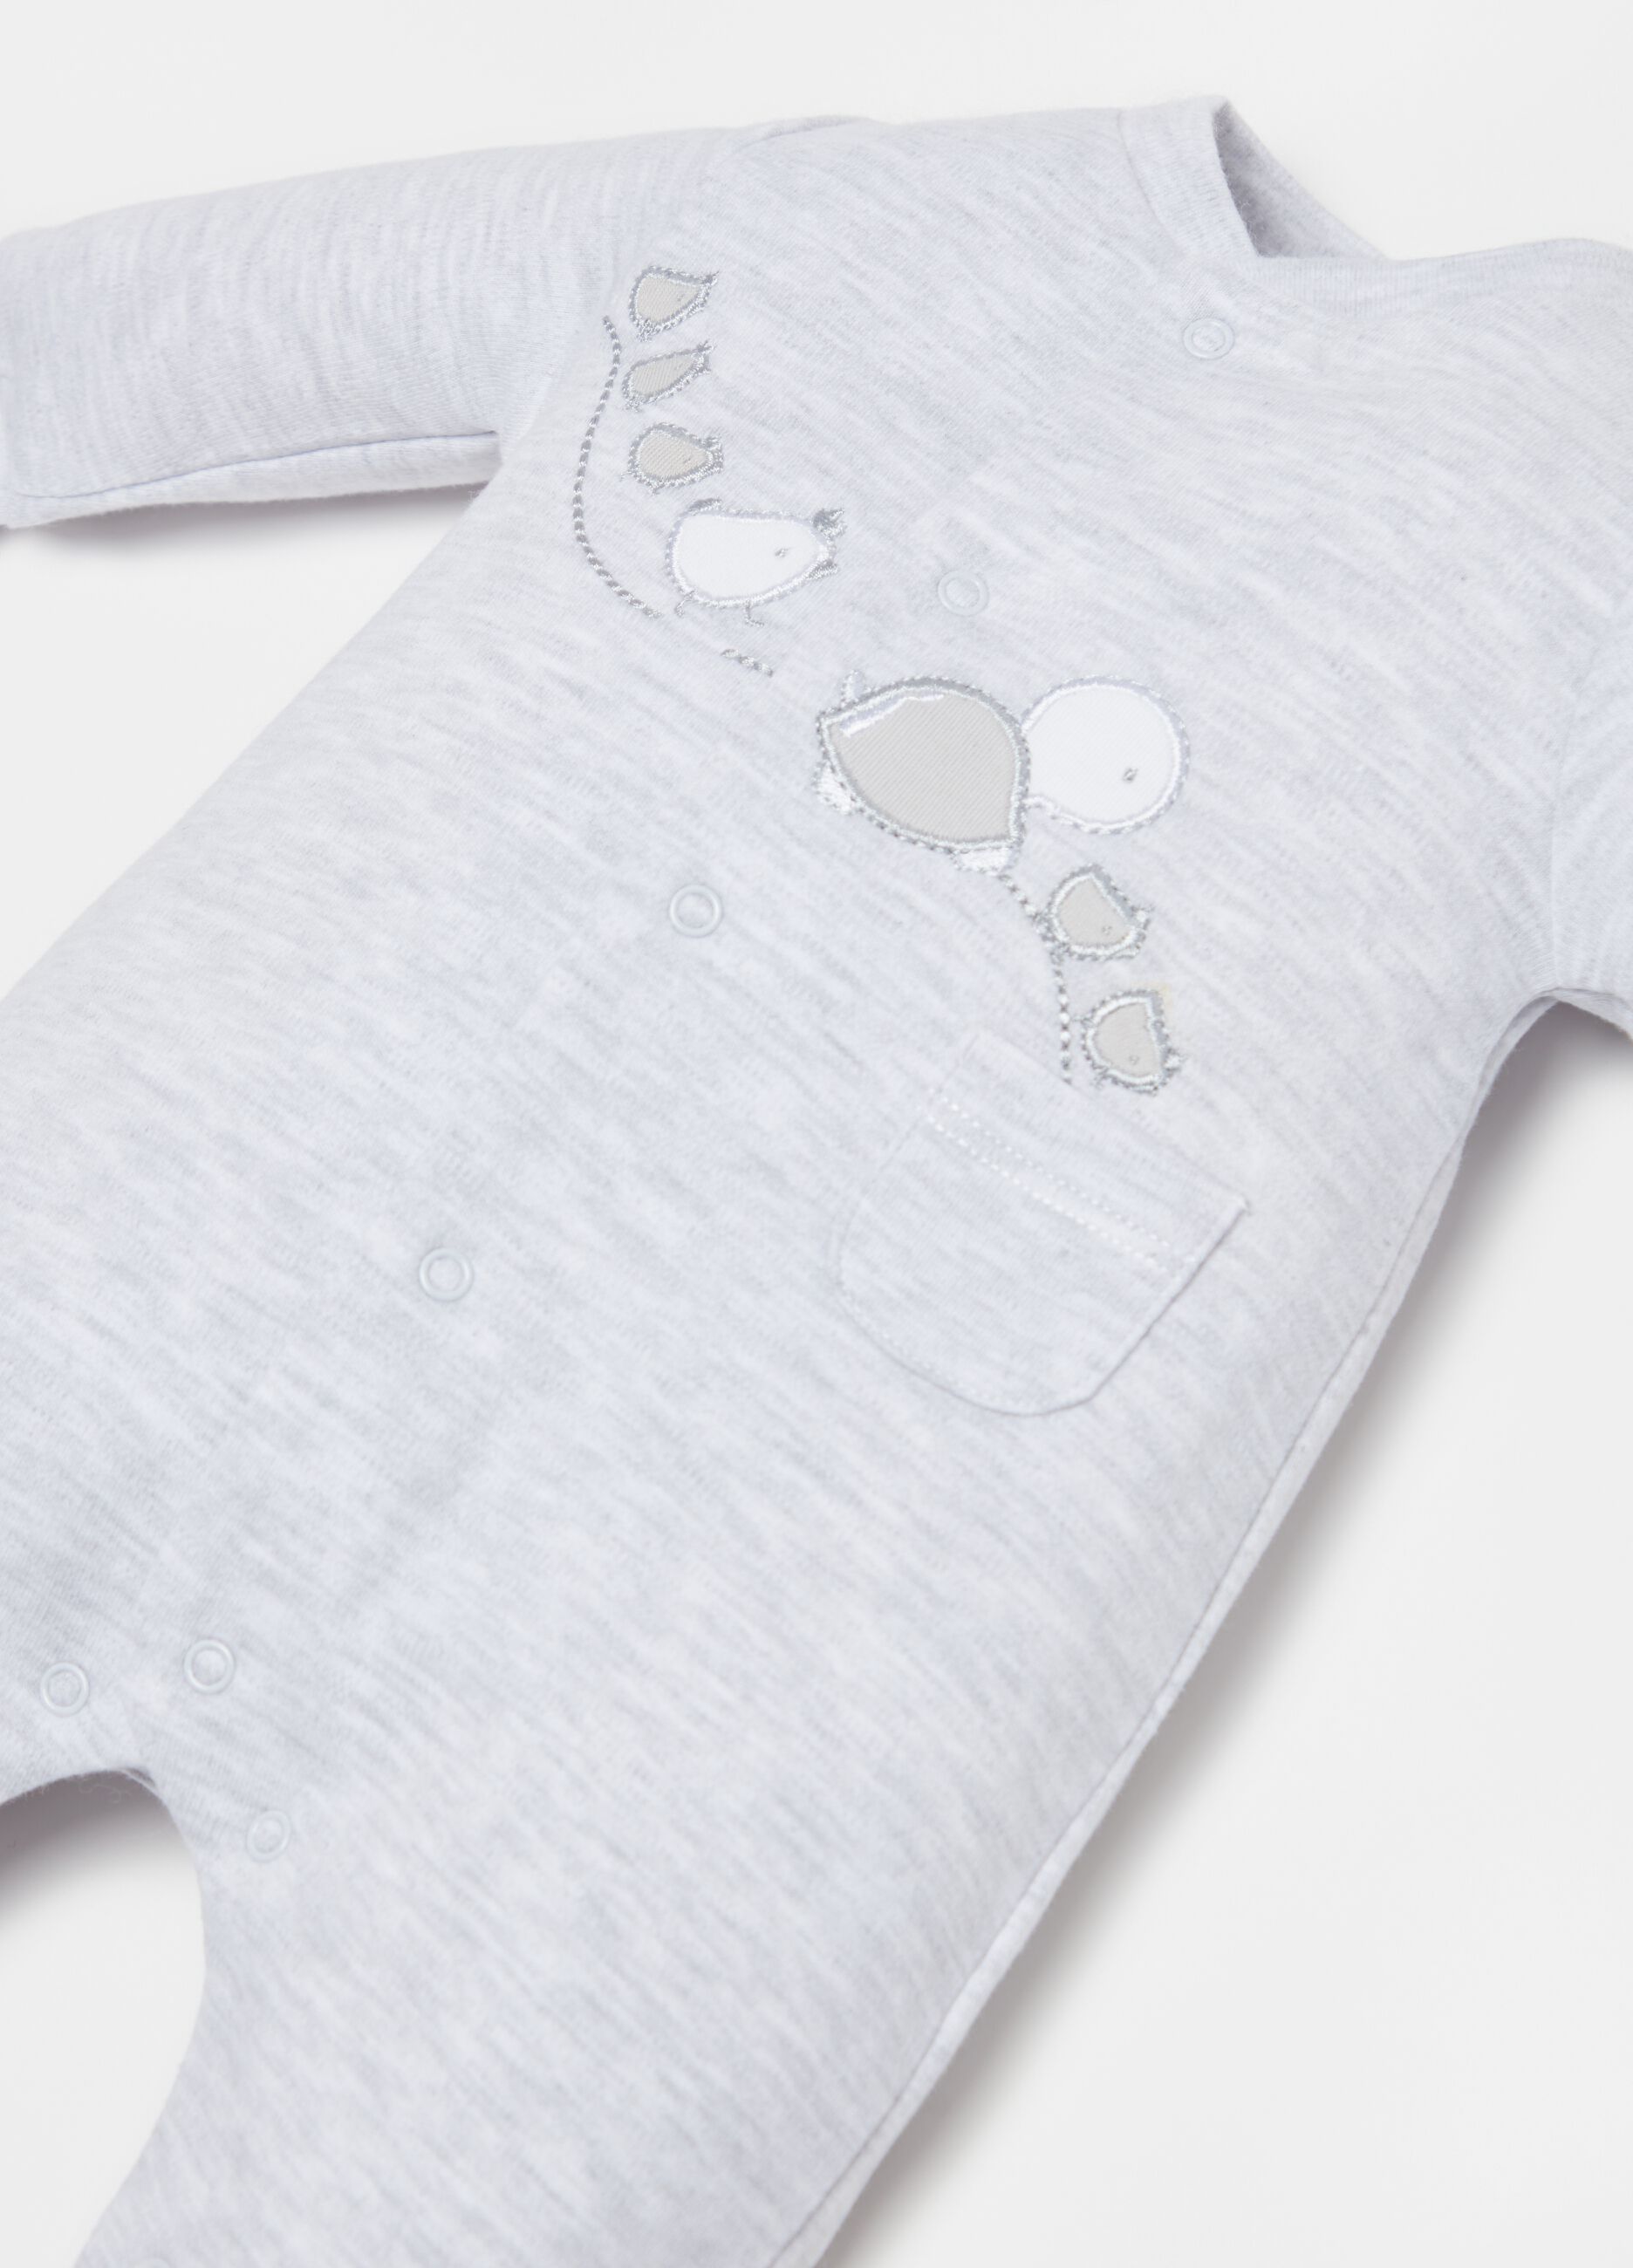 100% cotton onesie with feet and embroidery